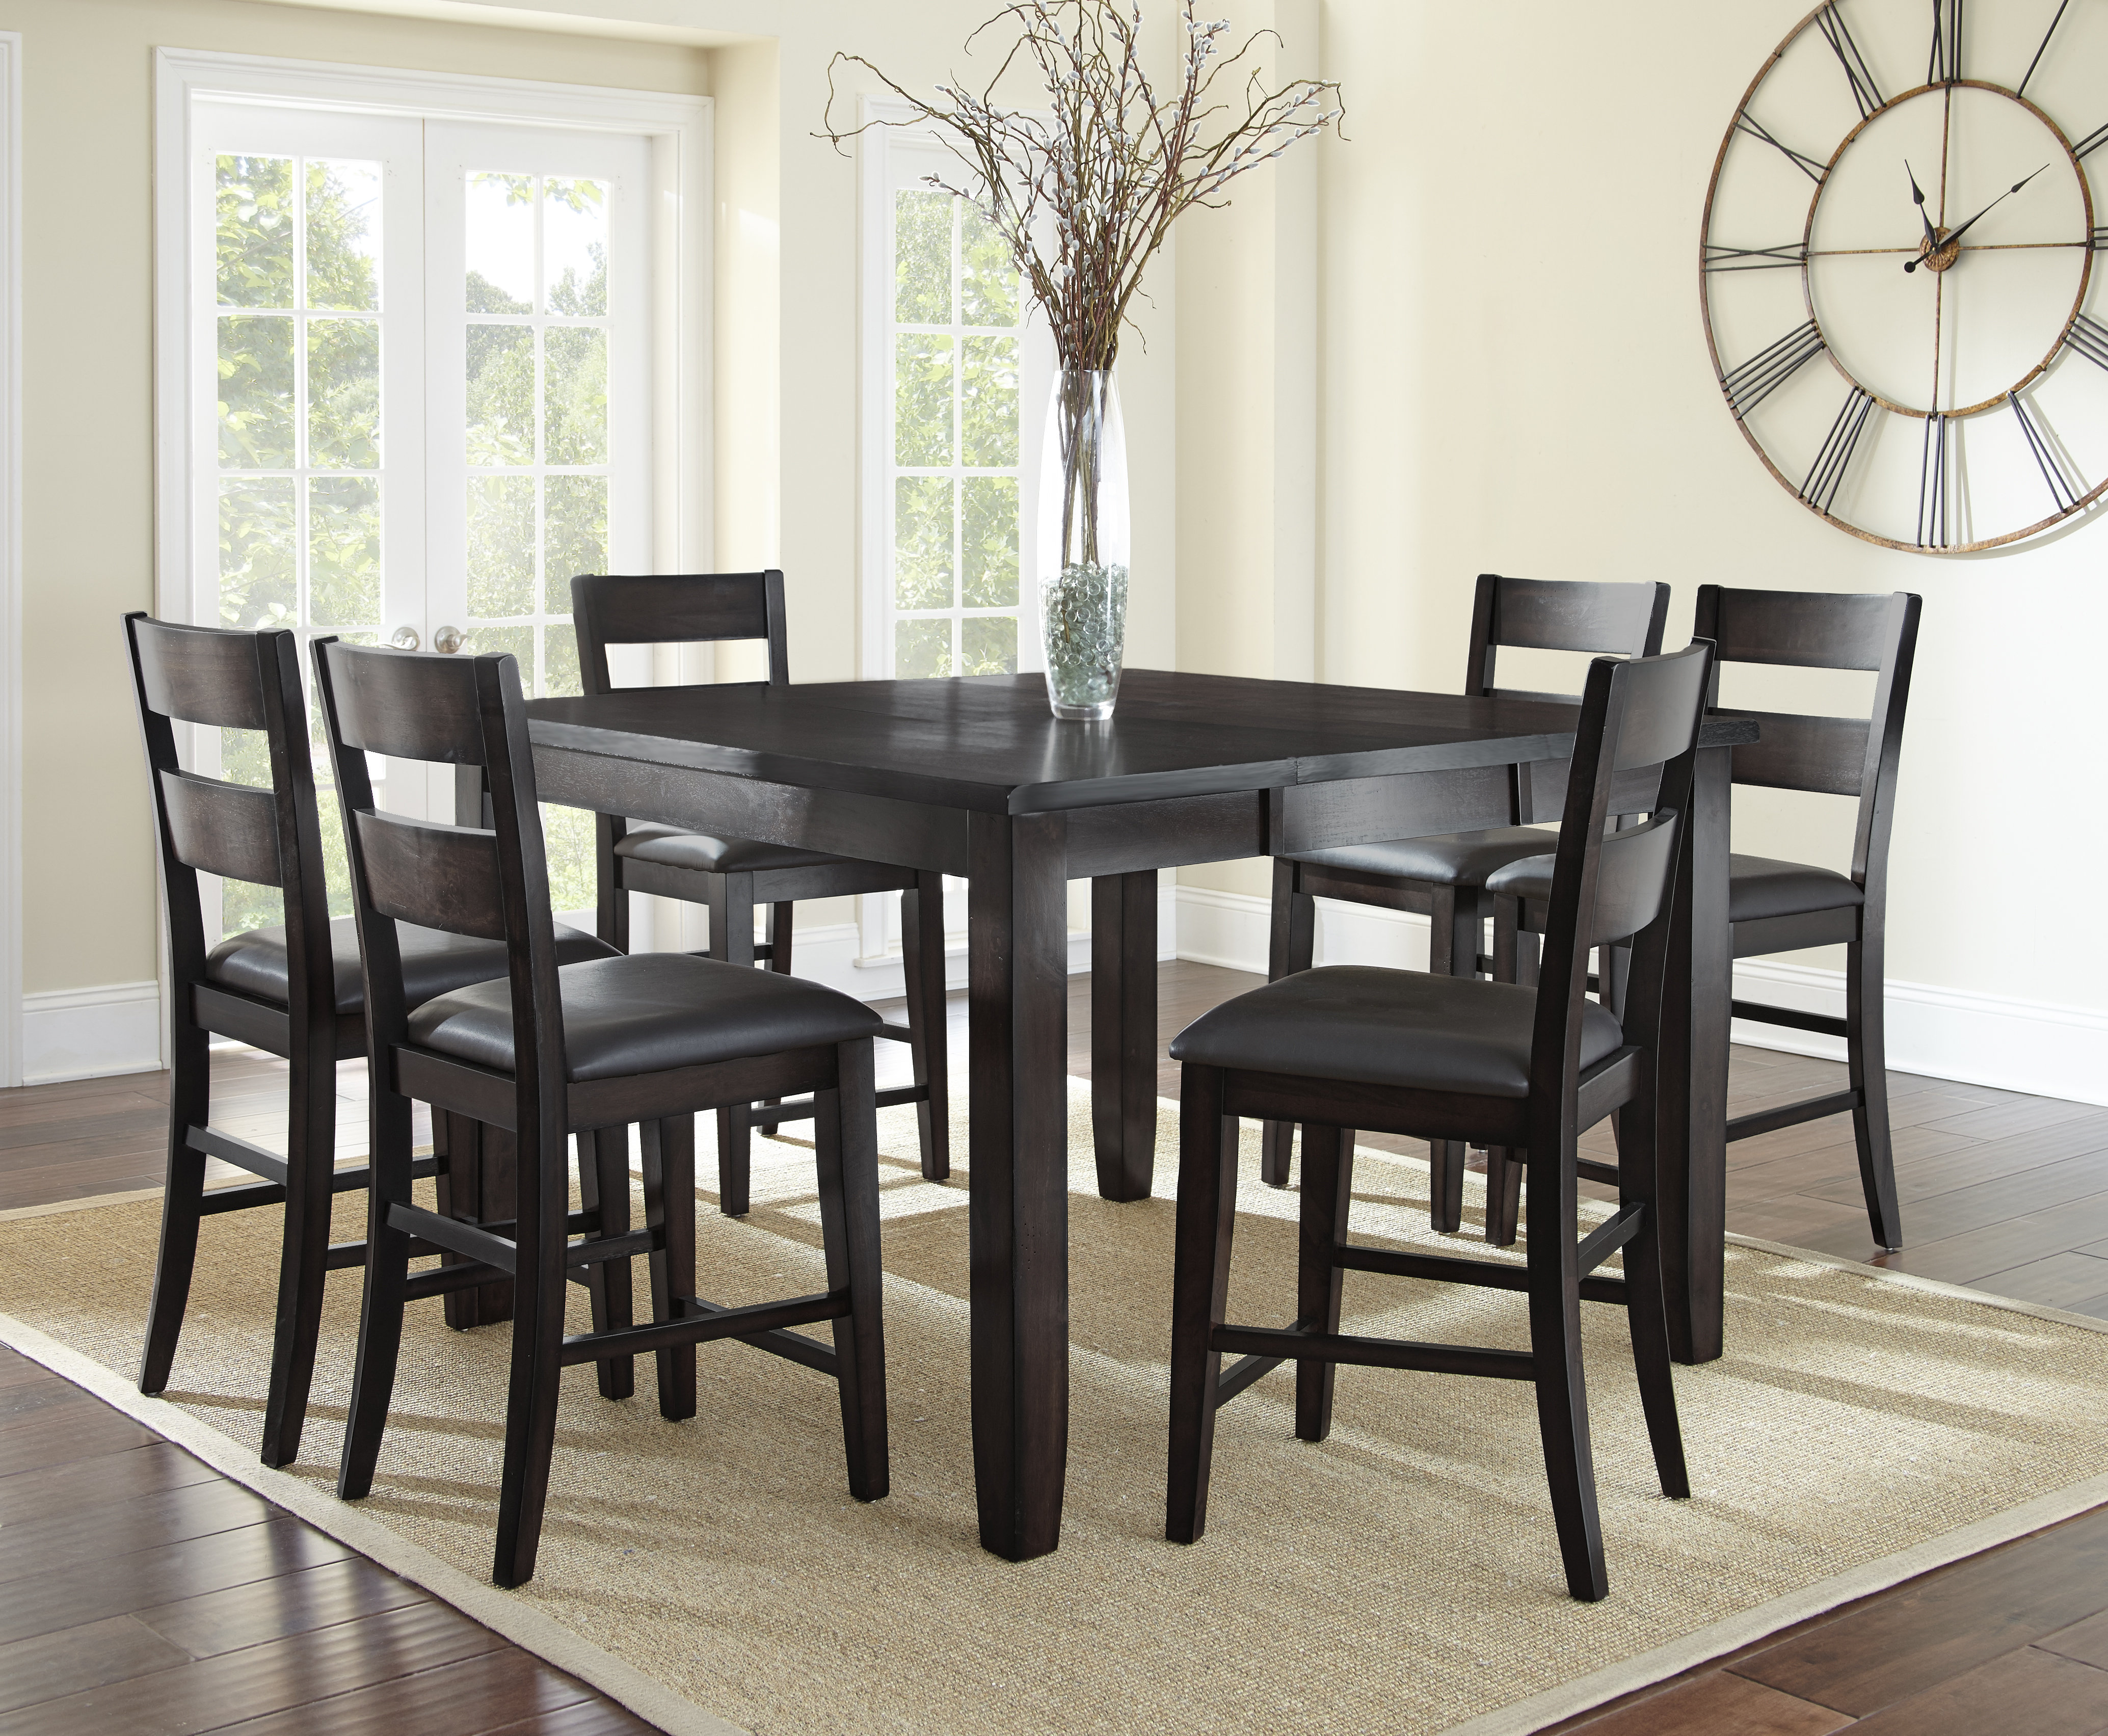 Alcott Hill Wynwood 7 Piece Counter Height Solid Wood Dining Set Reviews Wayfair